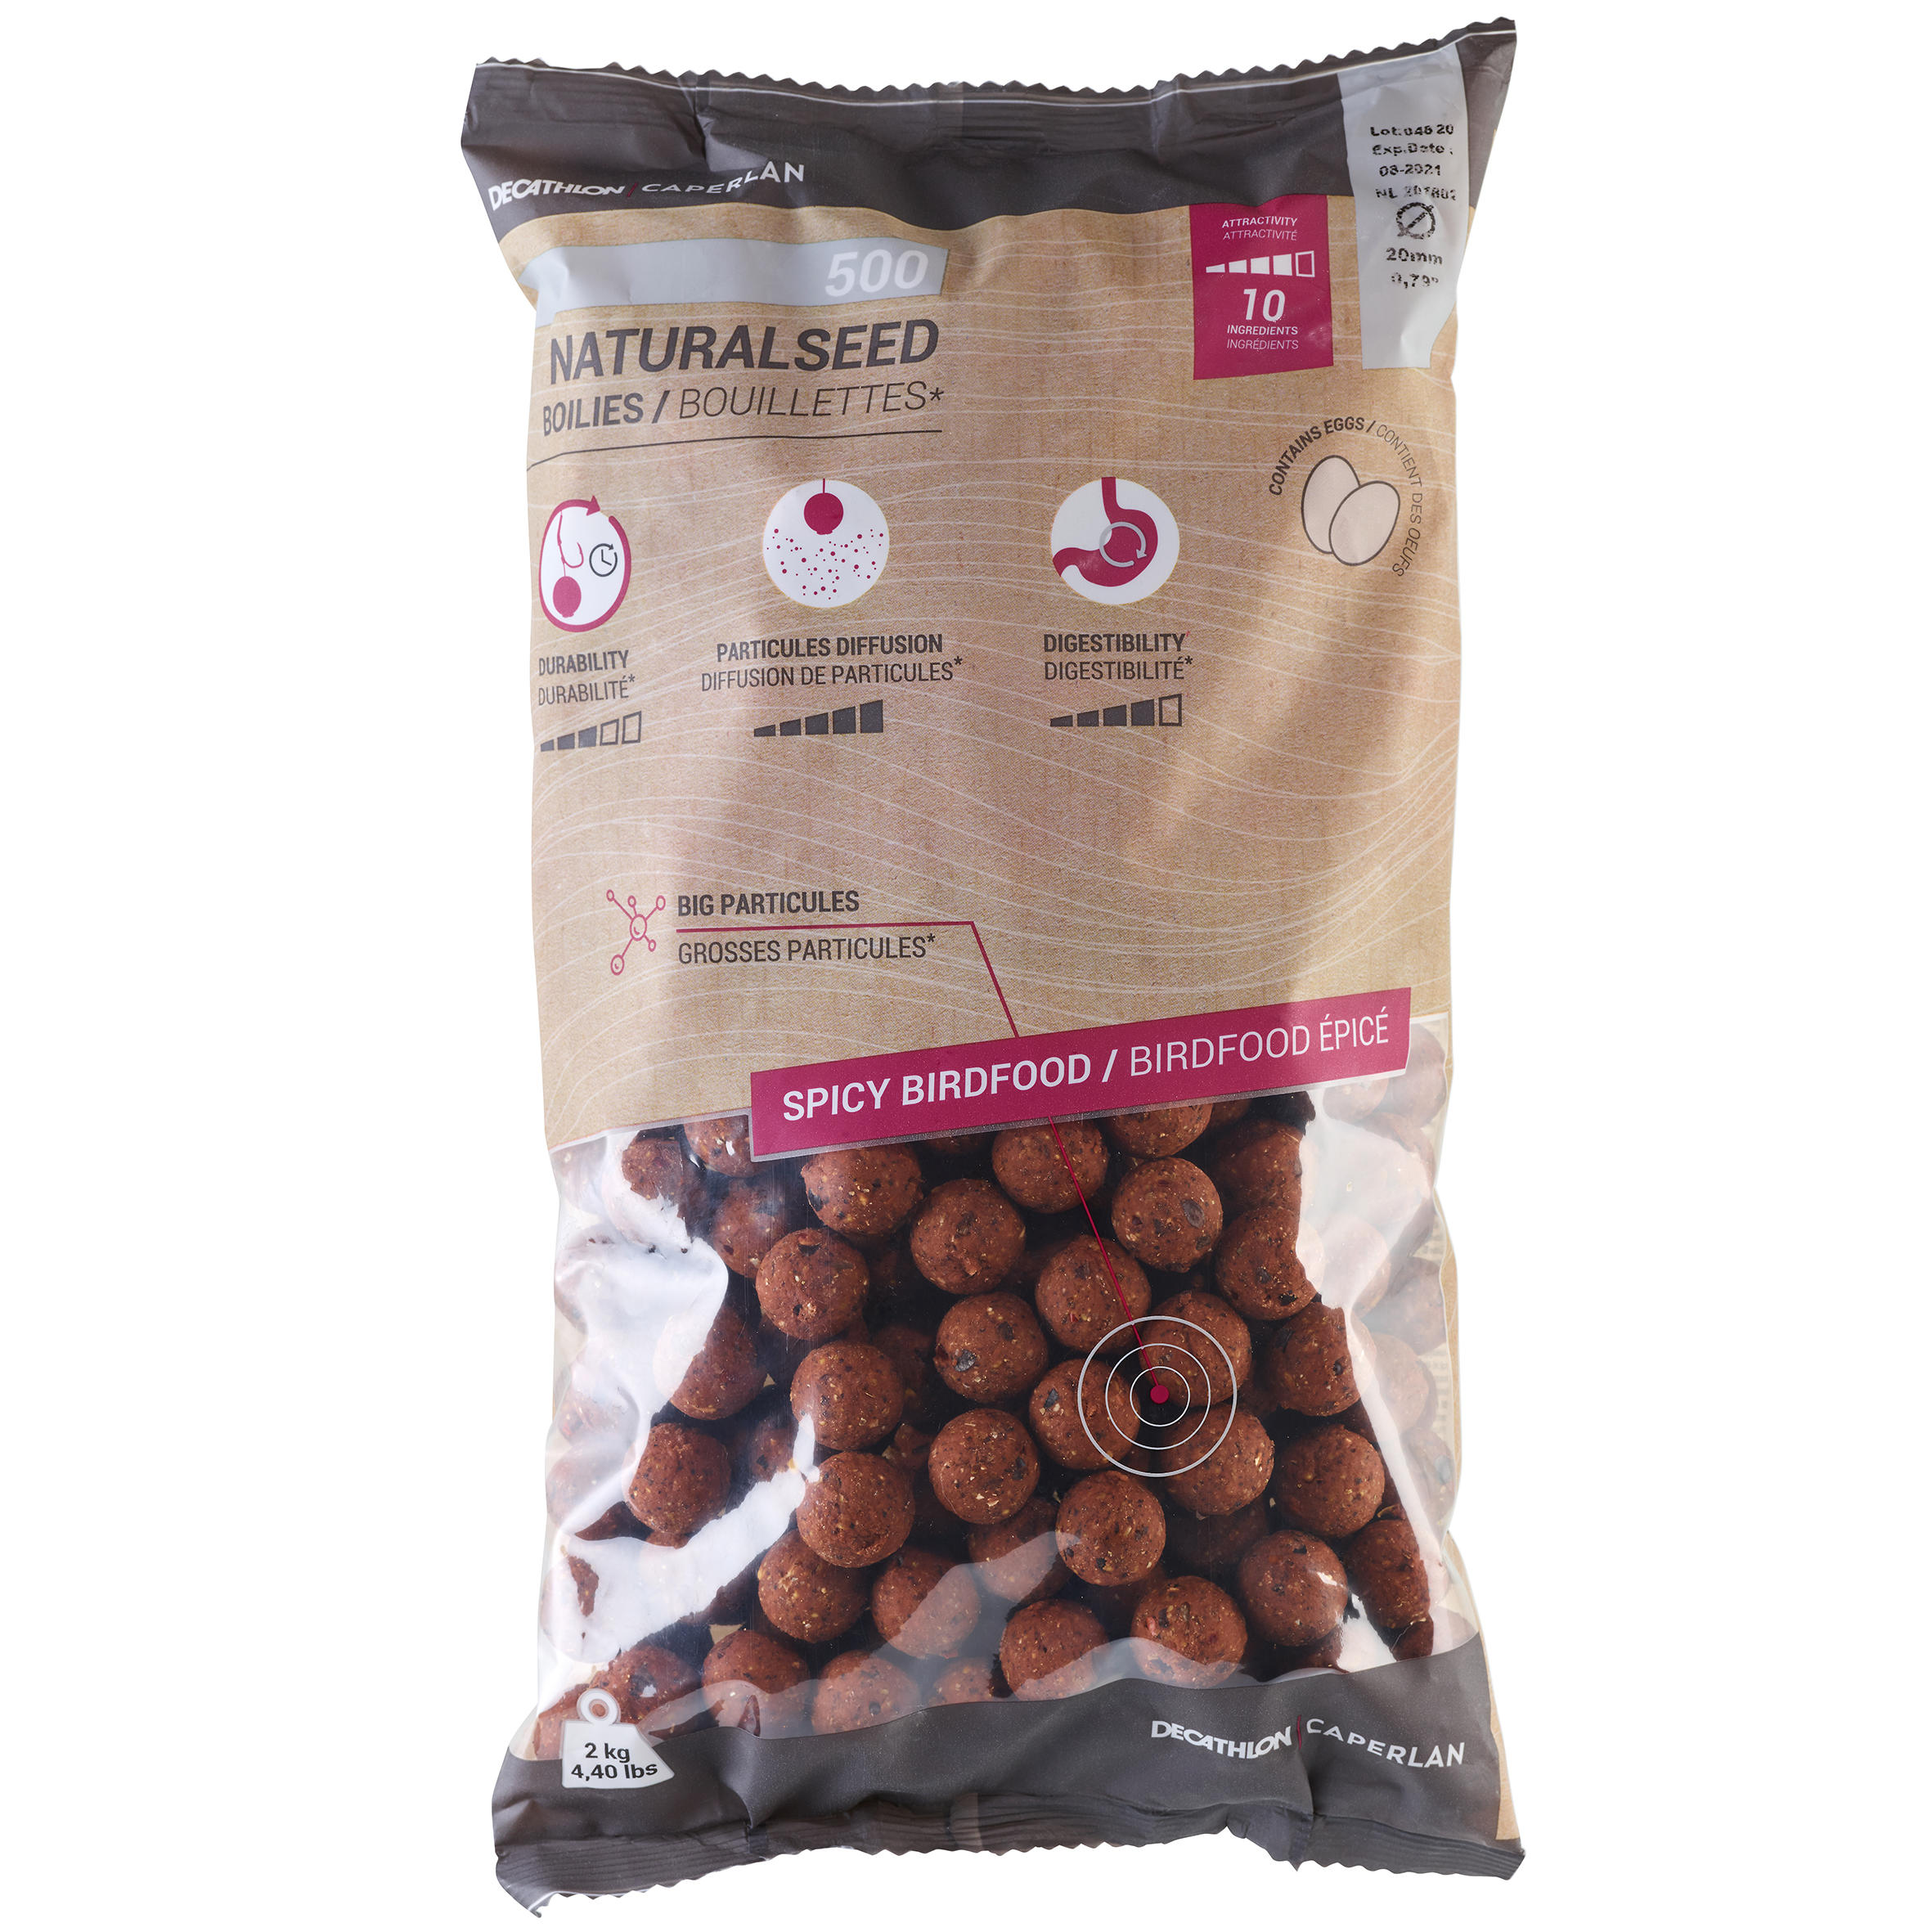 Carp Fishing Boilies NATURALSEED 20 mm 2 kg - Spicy Birdfood 4/4